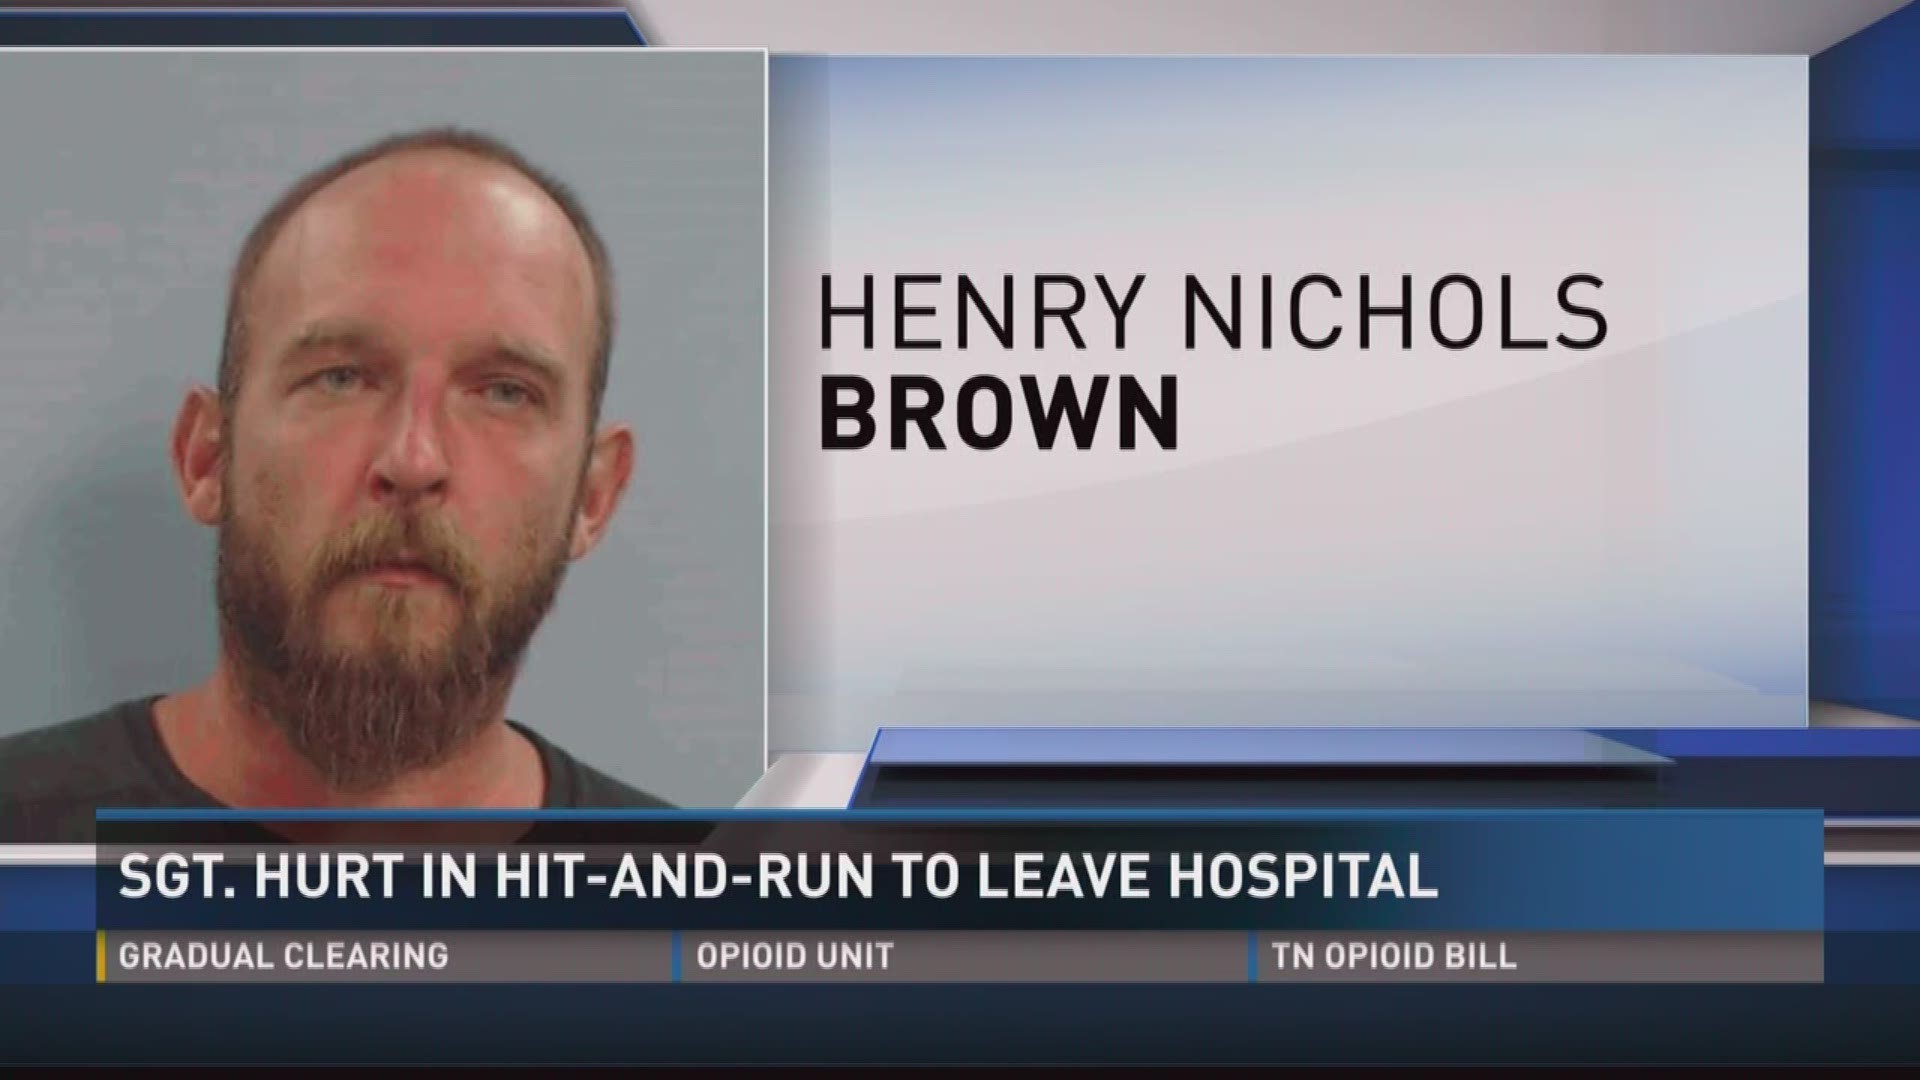 The officer severely injured his leg after a hit-and-run suspect hit him with his car trailer.